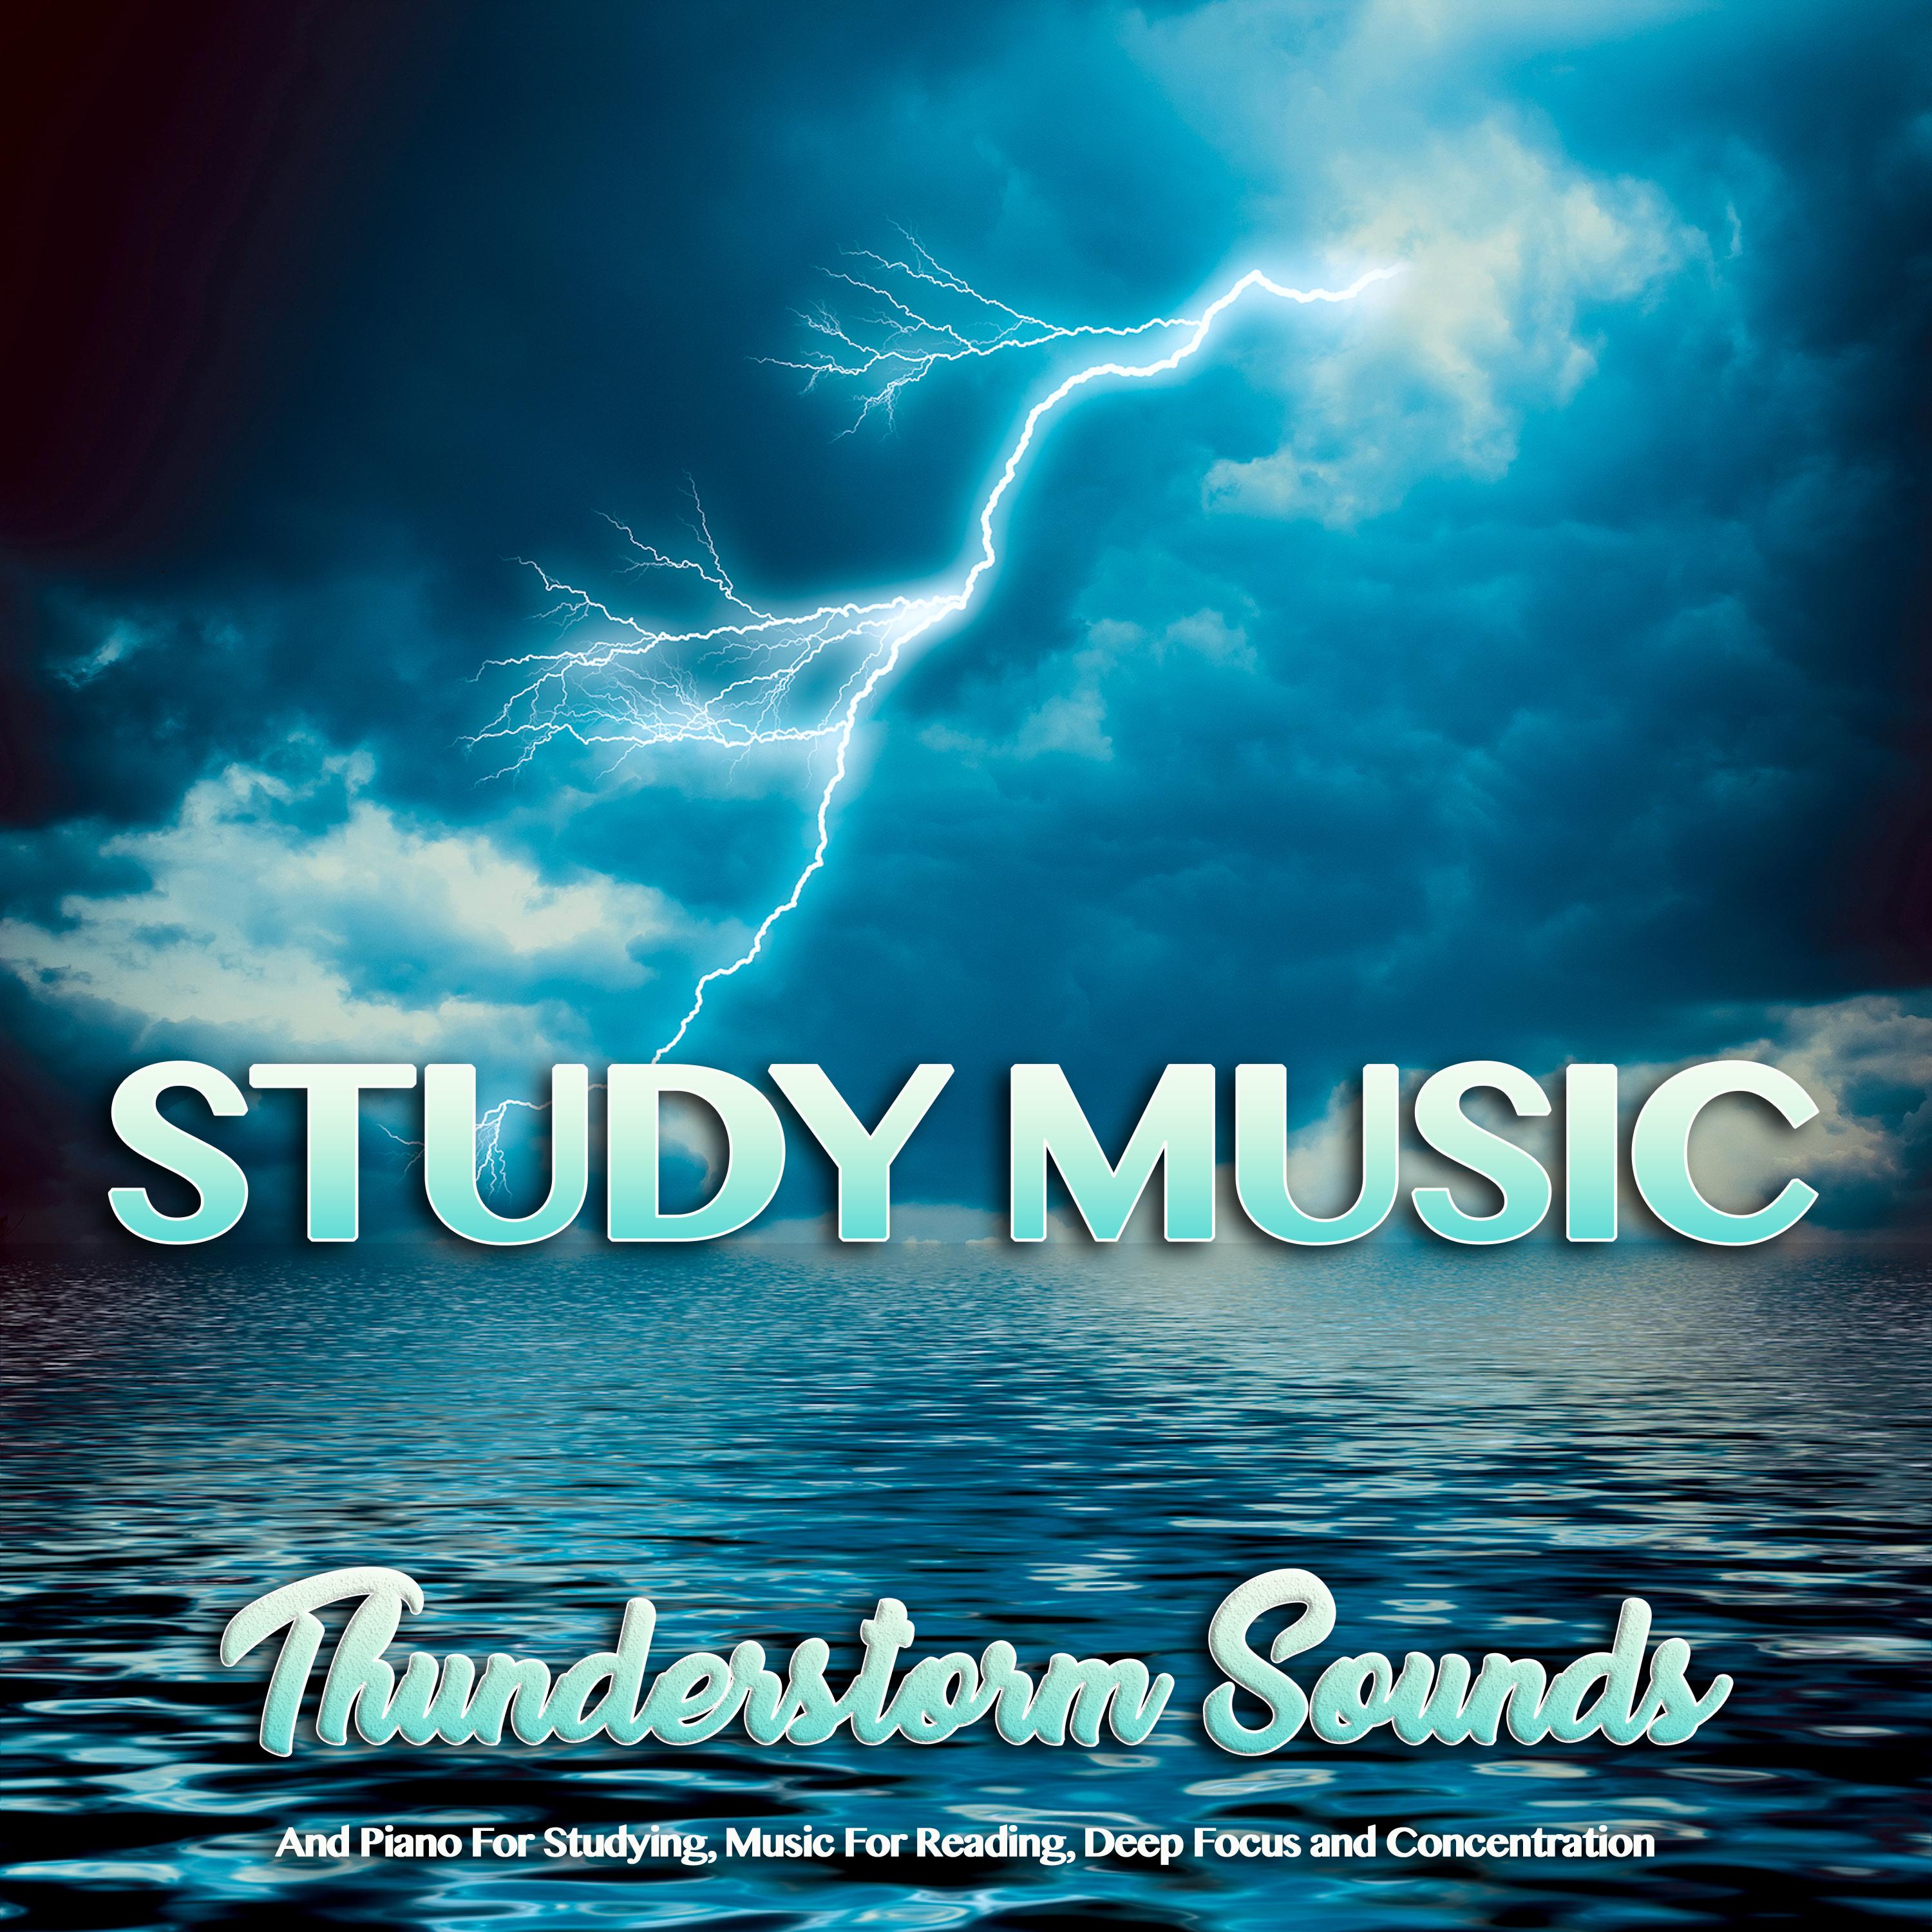 Thunderstorm Sounds For Reading